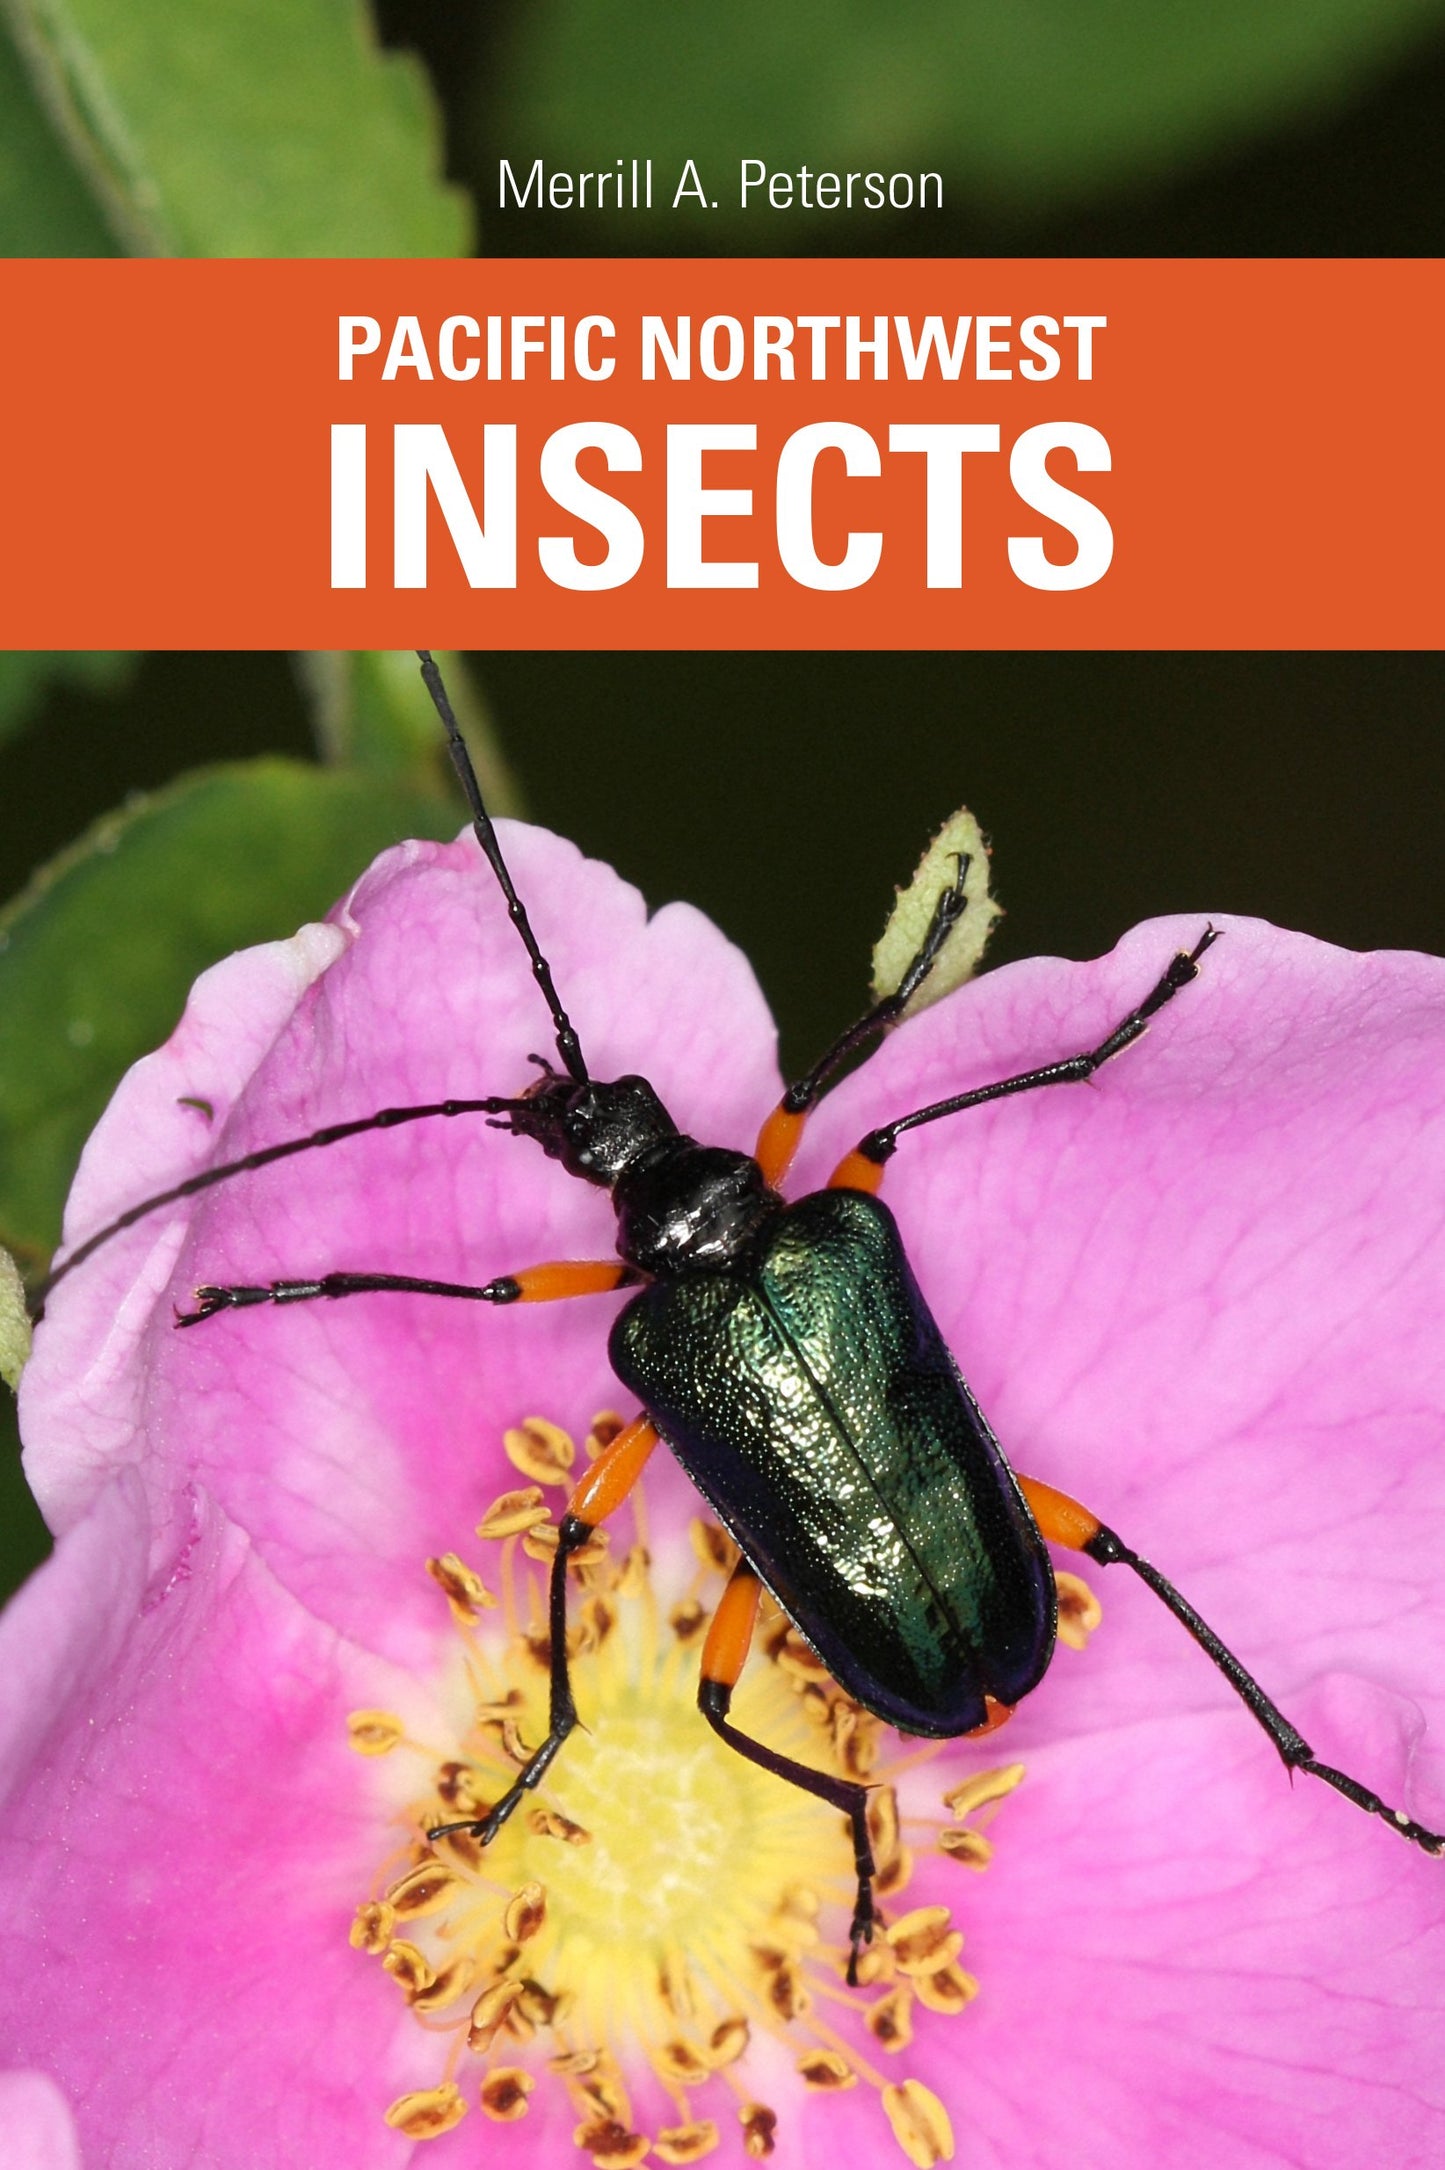 Pacific Northwest Insects (Peterson - paperback)